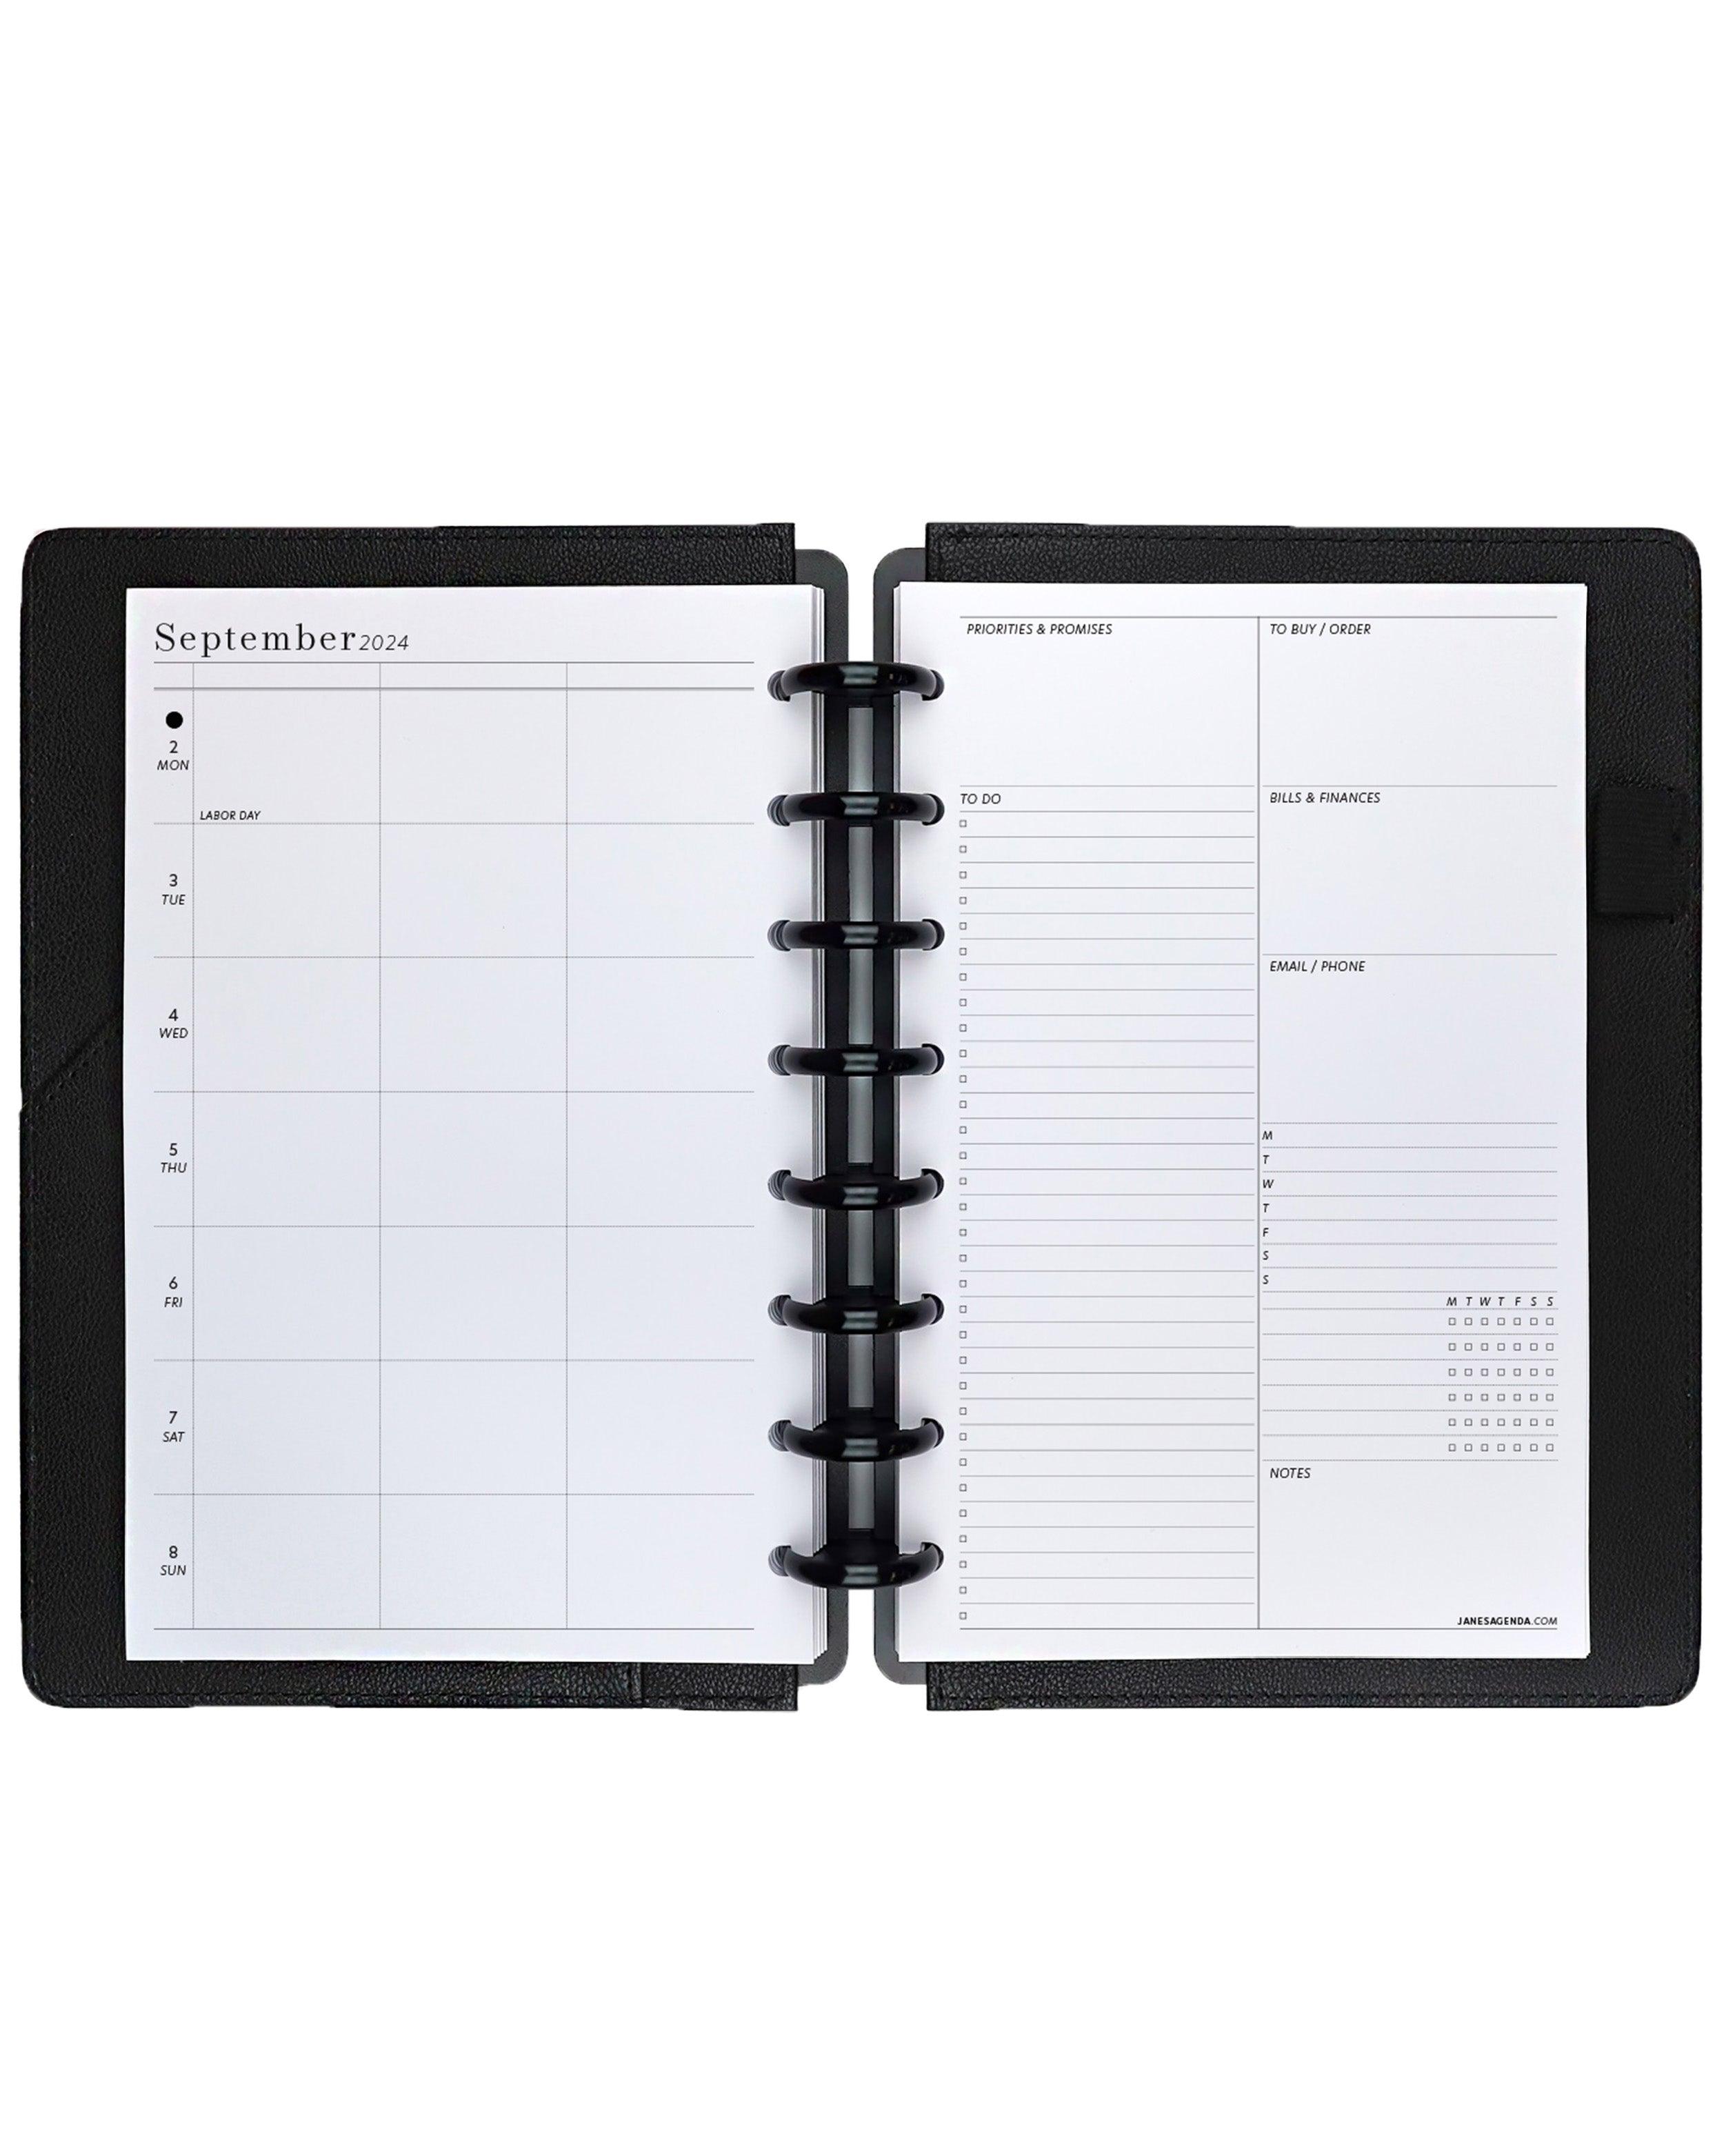 WeWeekly planner inserts calendar pages for planning in your discbound and six ring planners by Janes agenda.